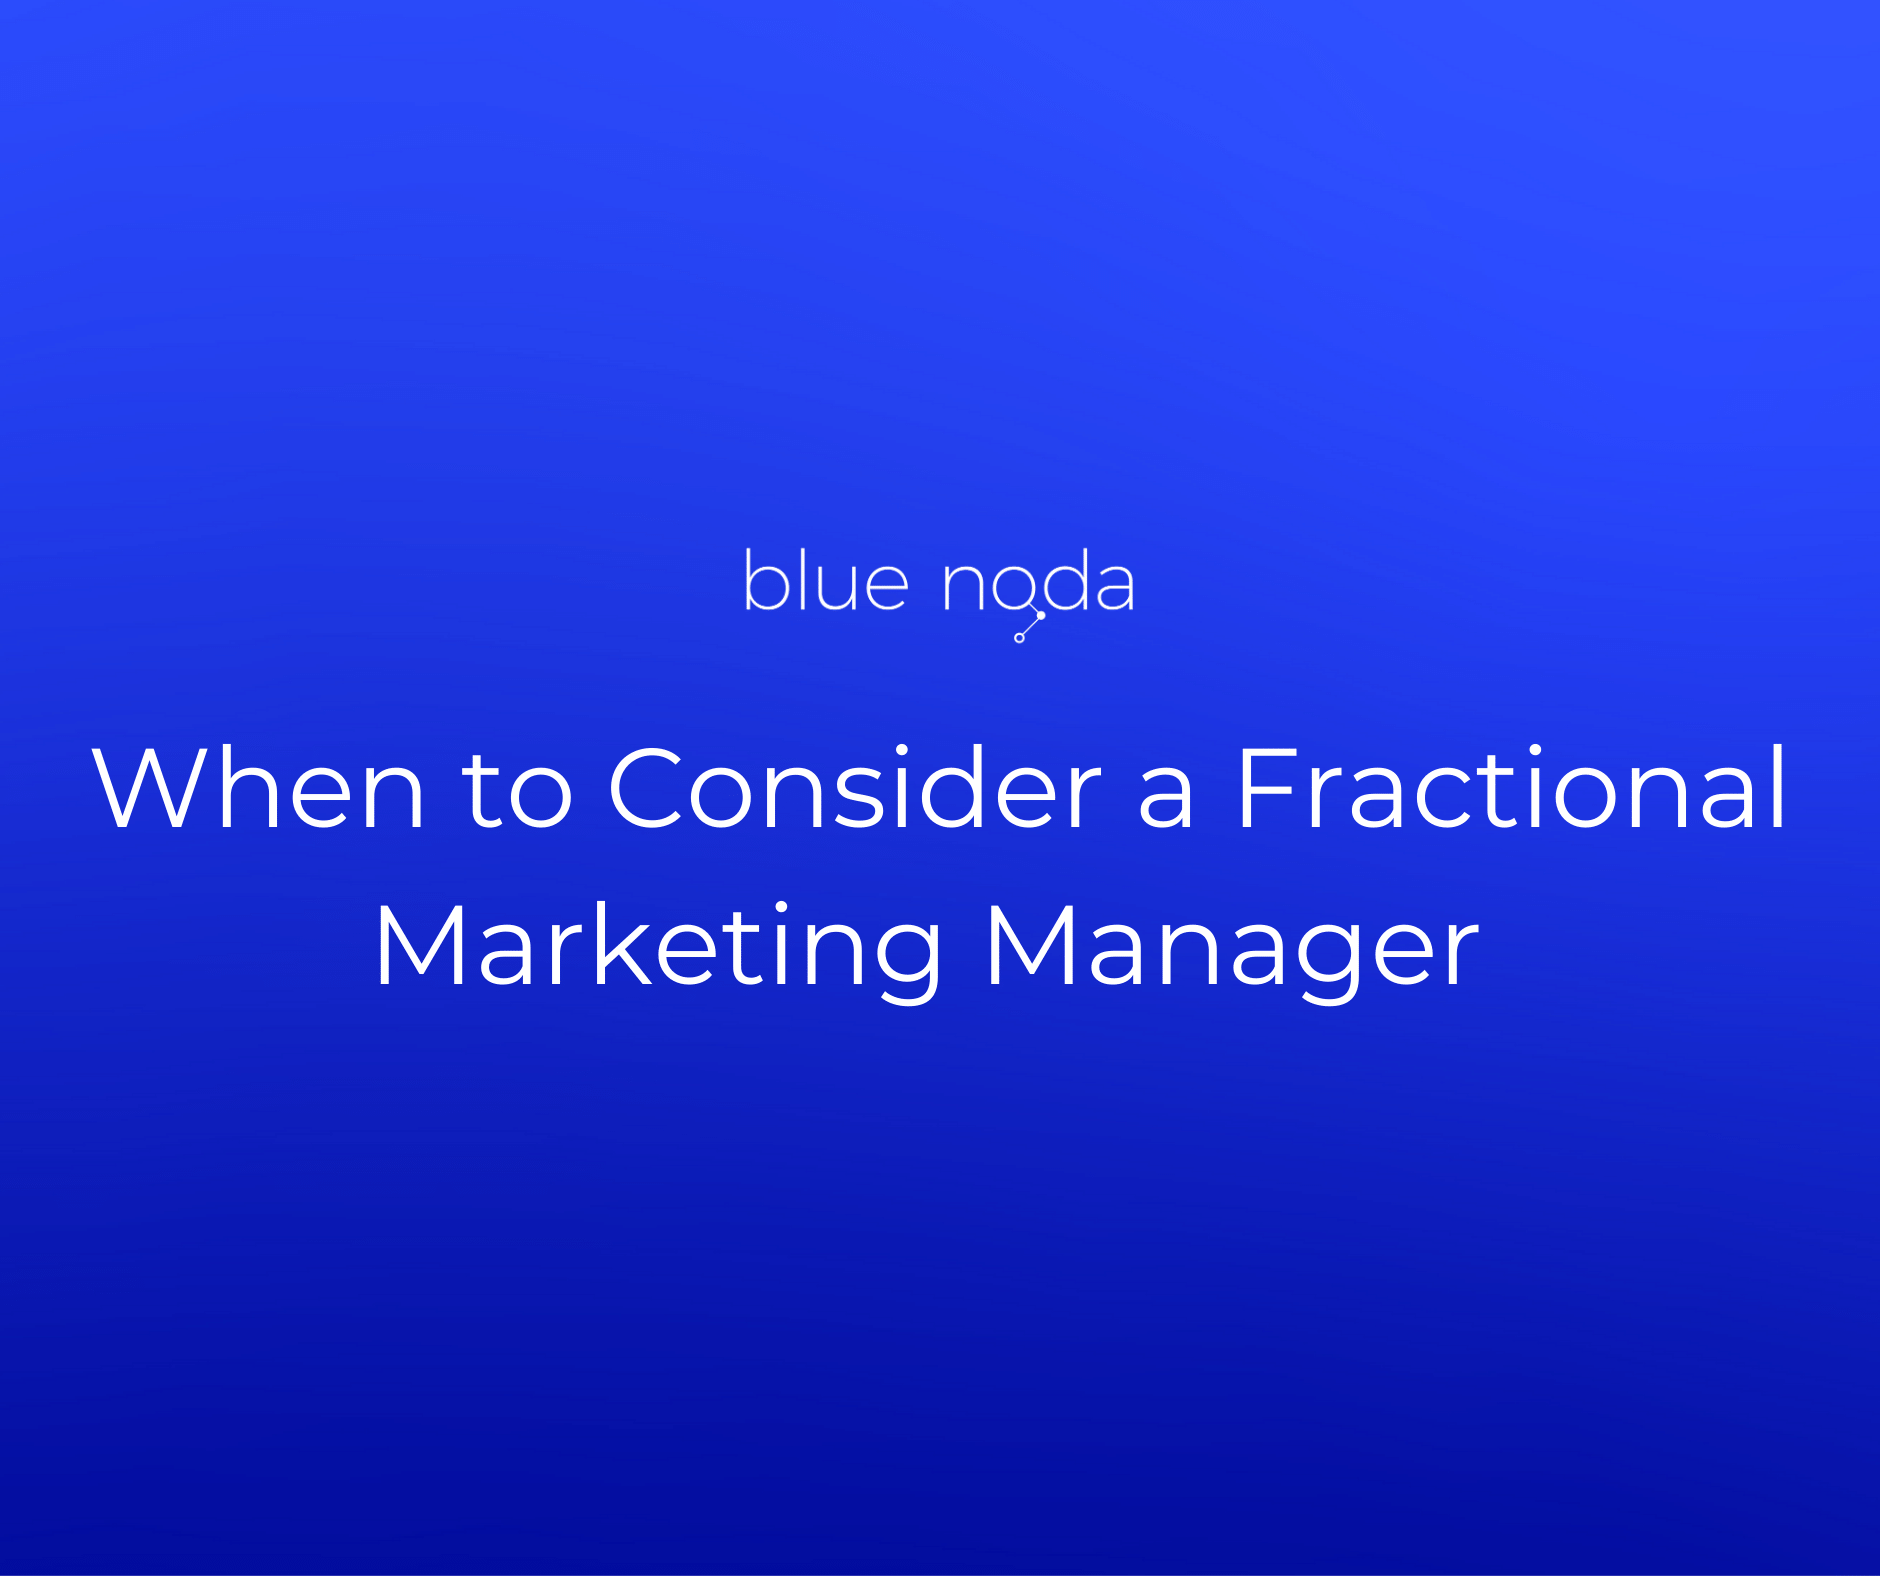 When to Consider a Fractional Marketing Manager - blog